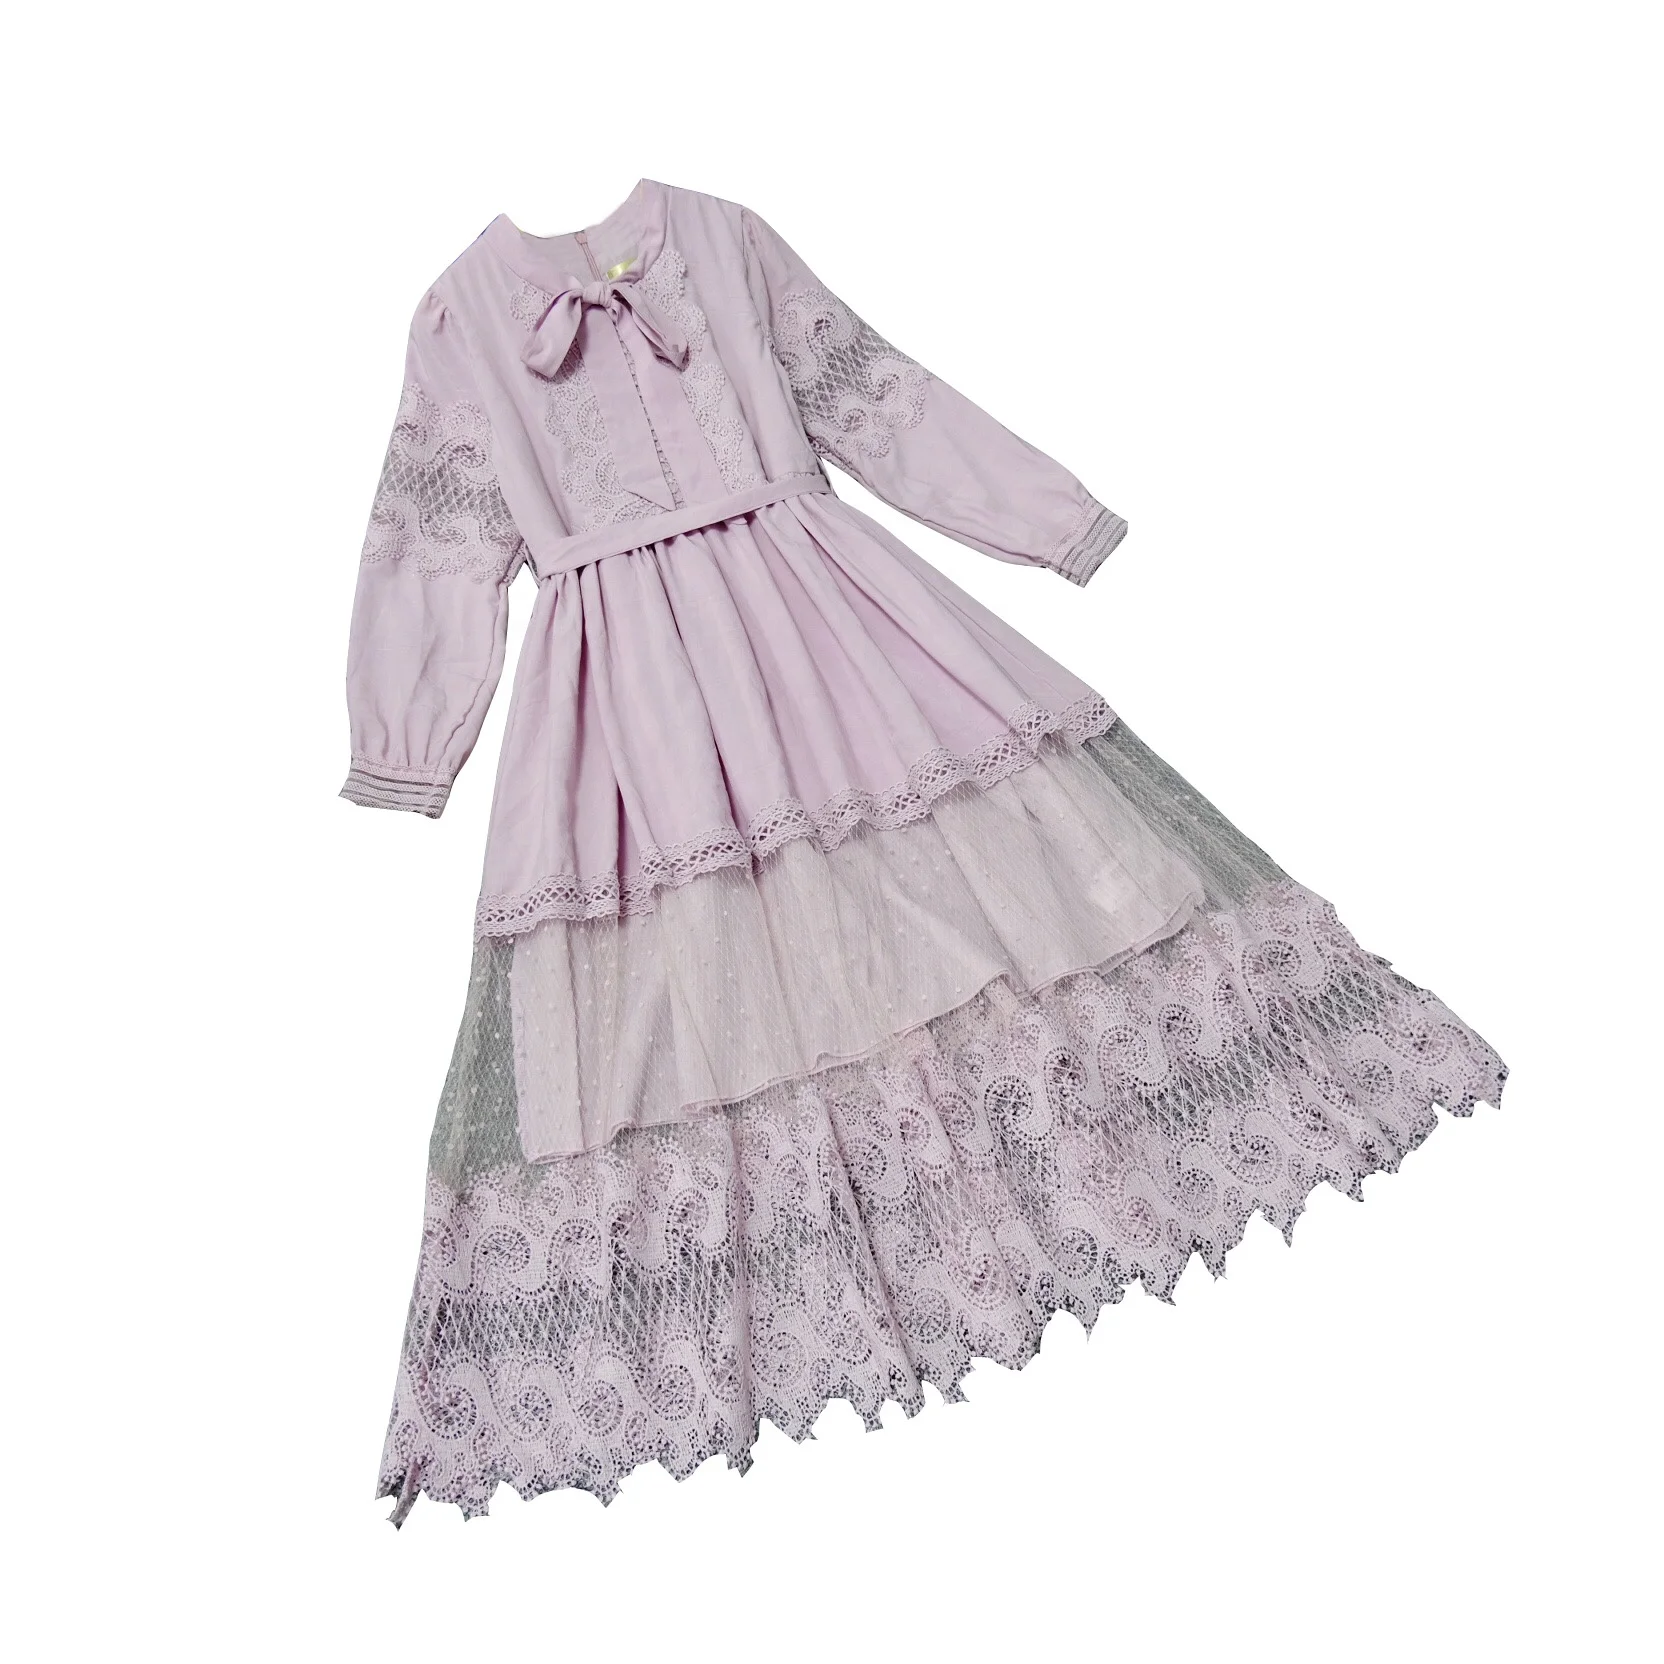 

Baby Girl Princess Dress Kids Spring Long Sleeve Patchwork Lace Floral Fashion Design Clothes